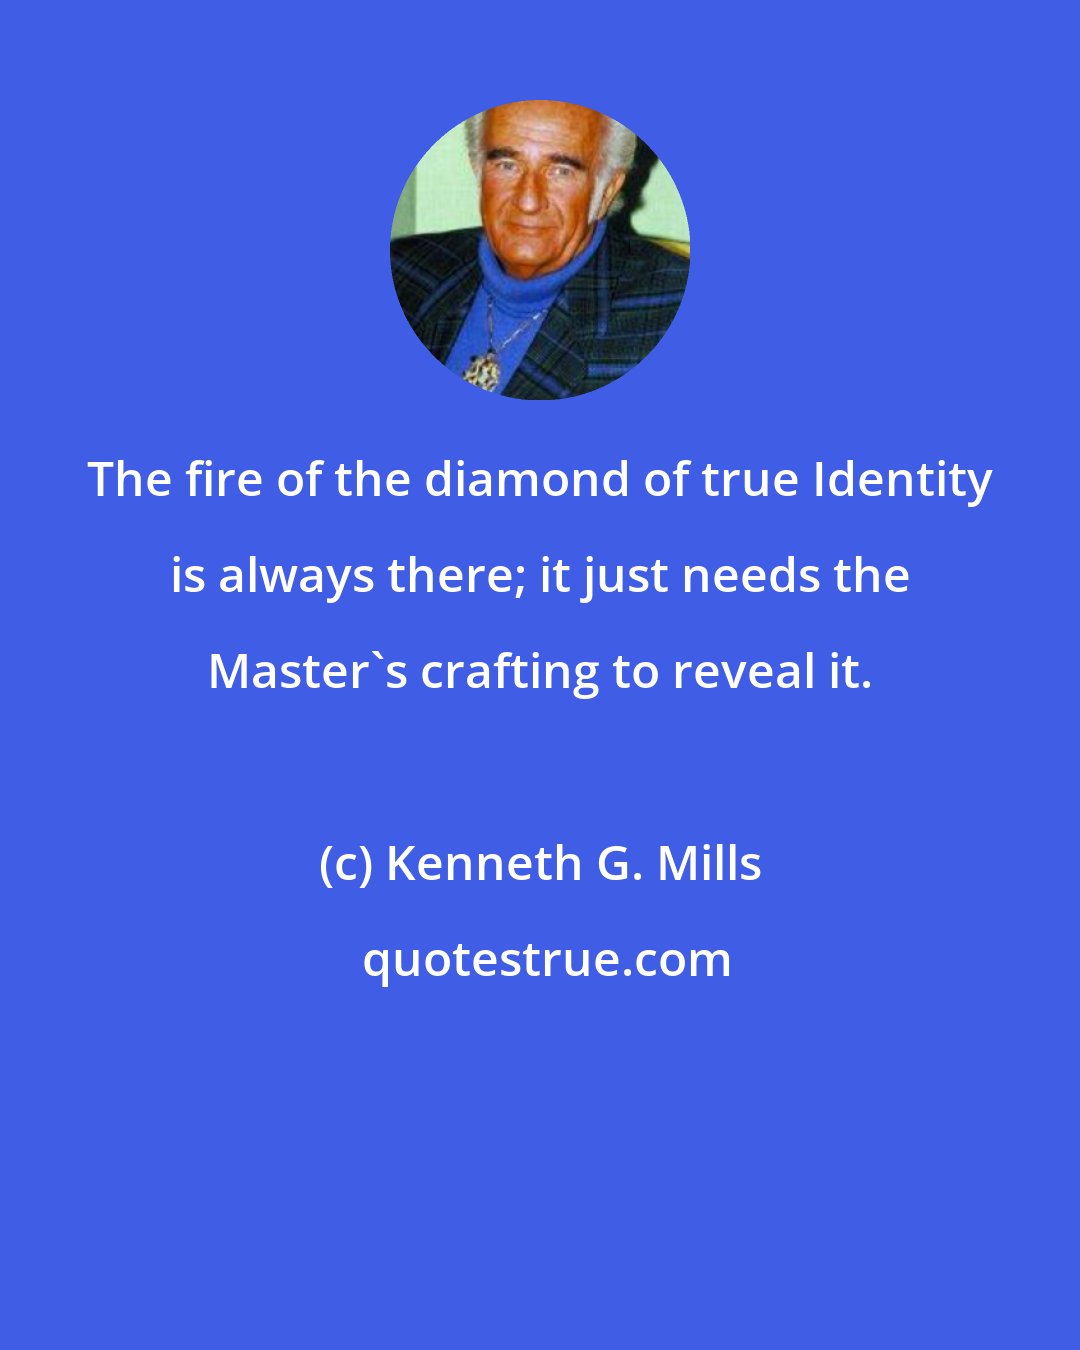 Kenneth G. Mills: The fire of the diamond of true Identity is always there; it just needs the Master's crafting to reveal it.